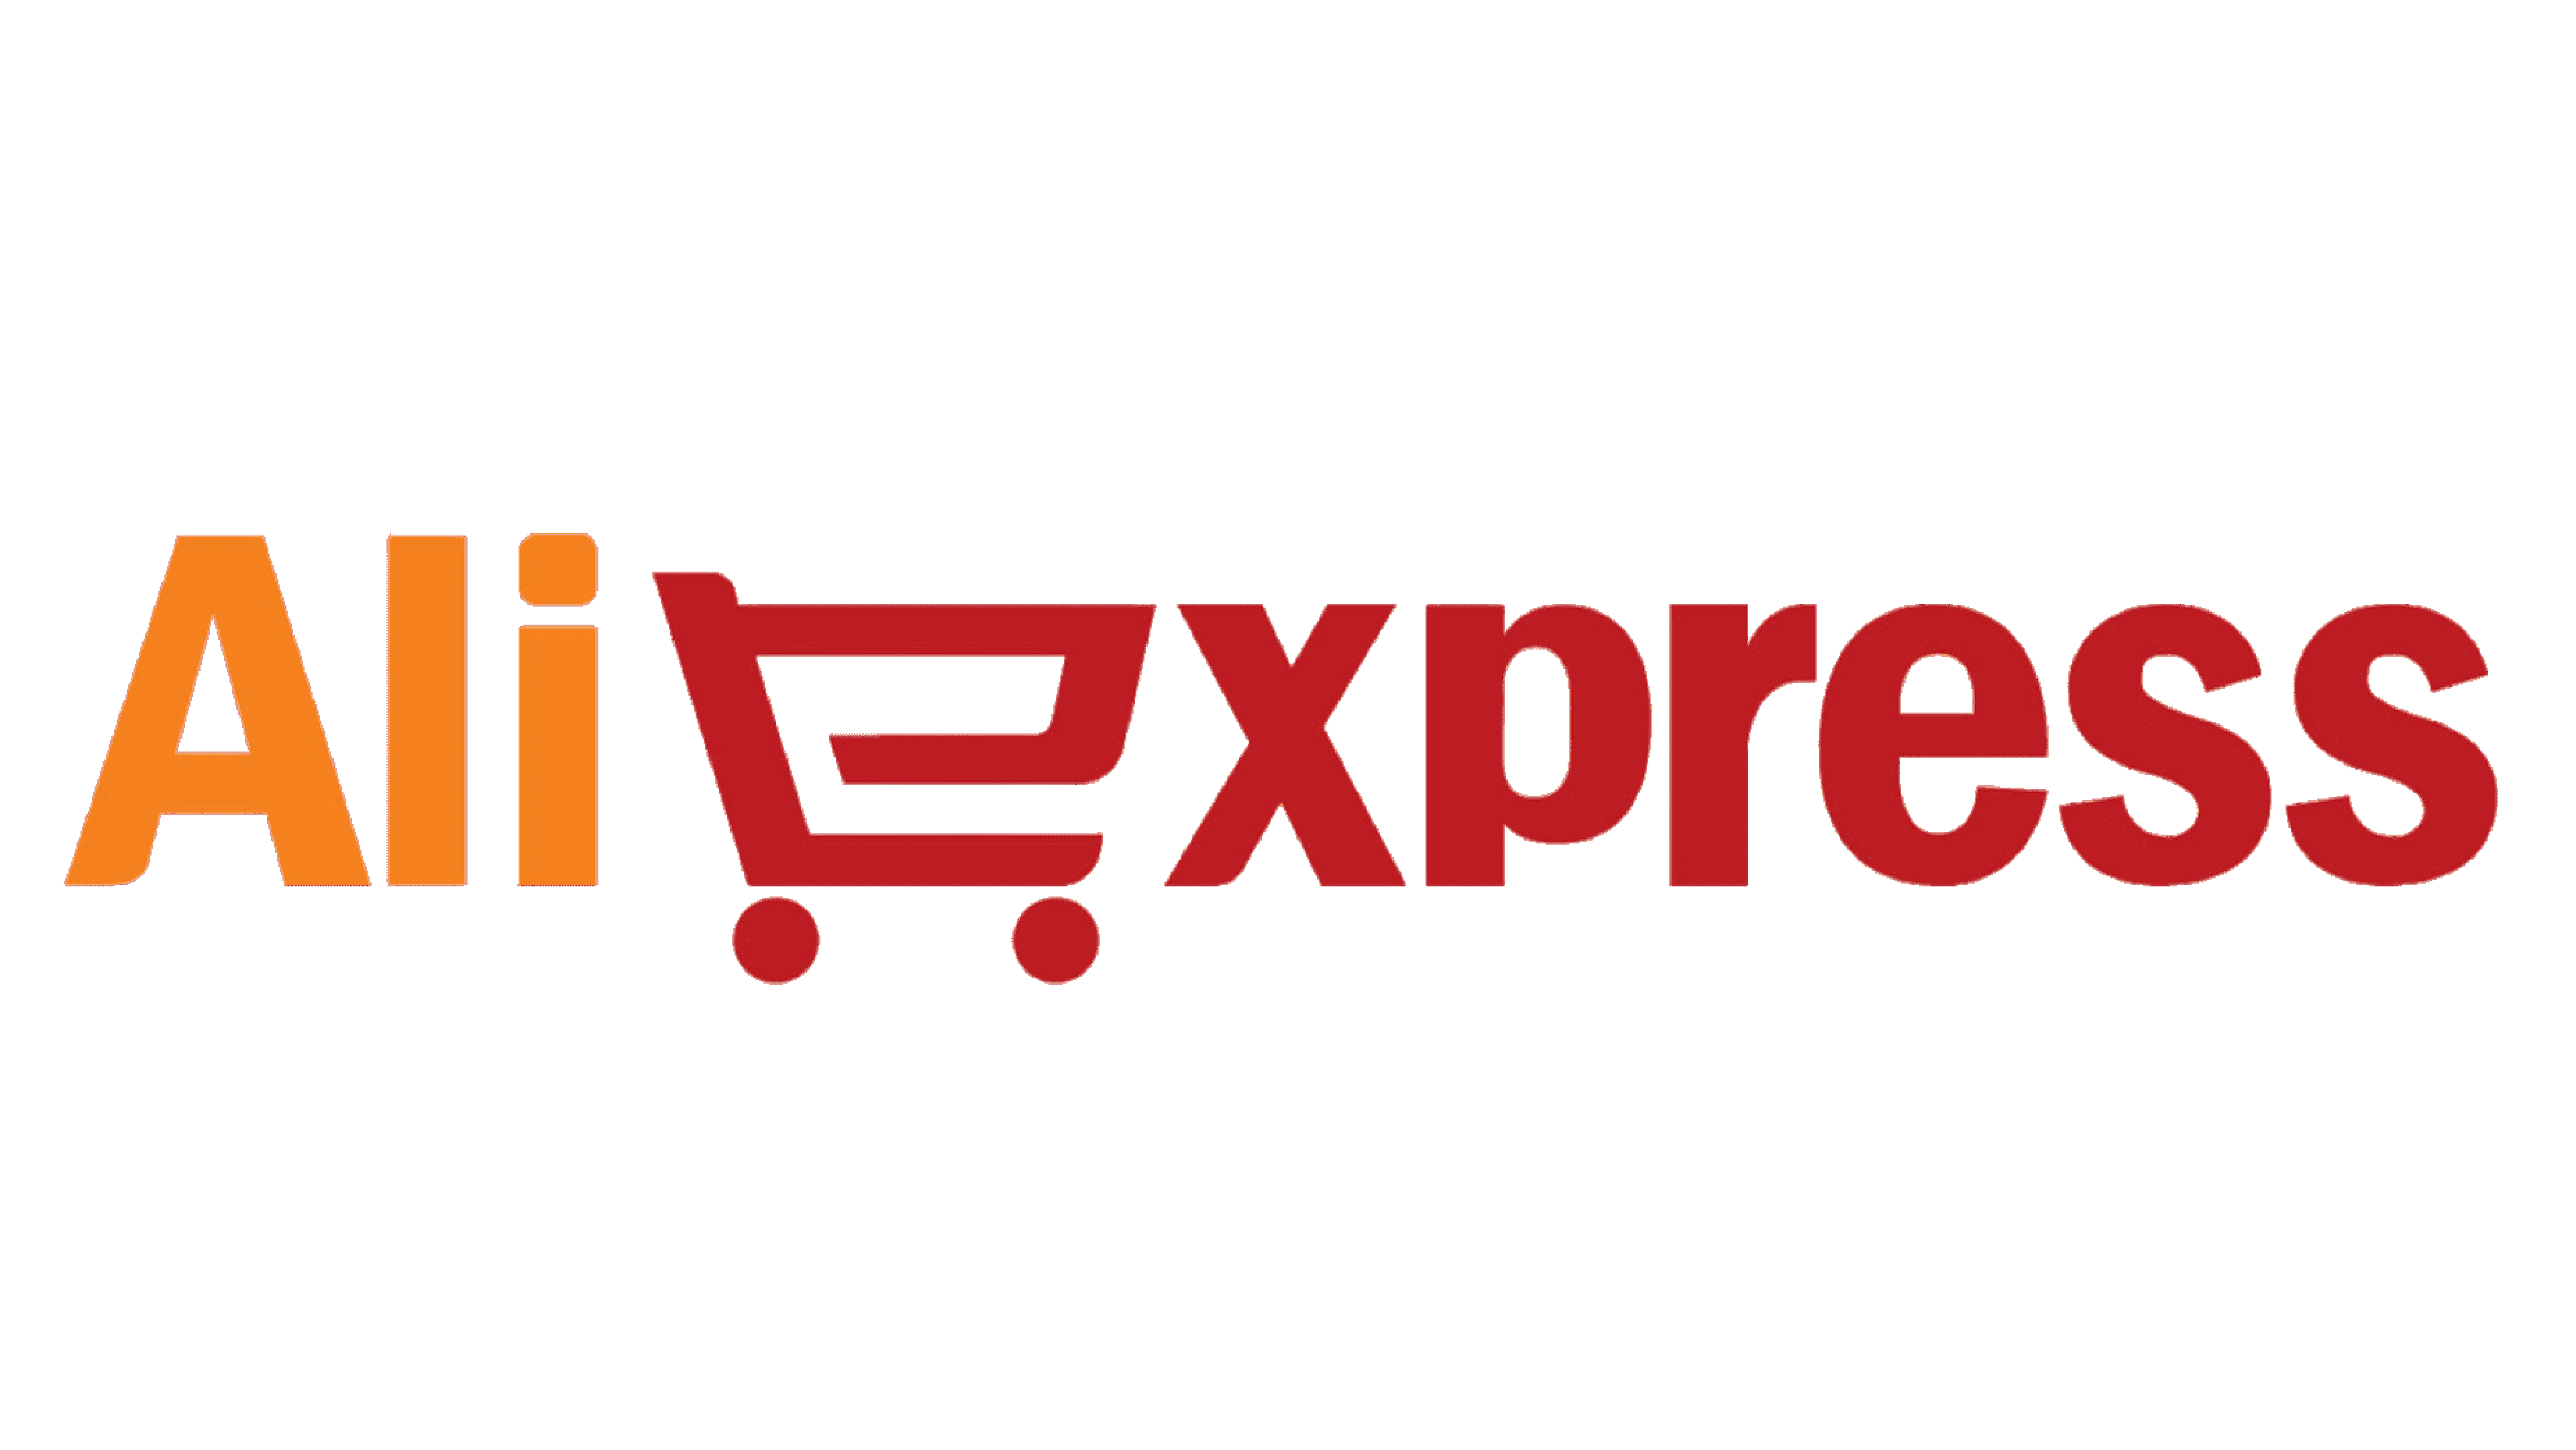 Sources Alibaba Russia Aliexpress Russiayang Wall